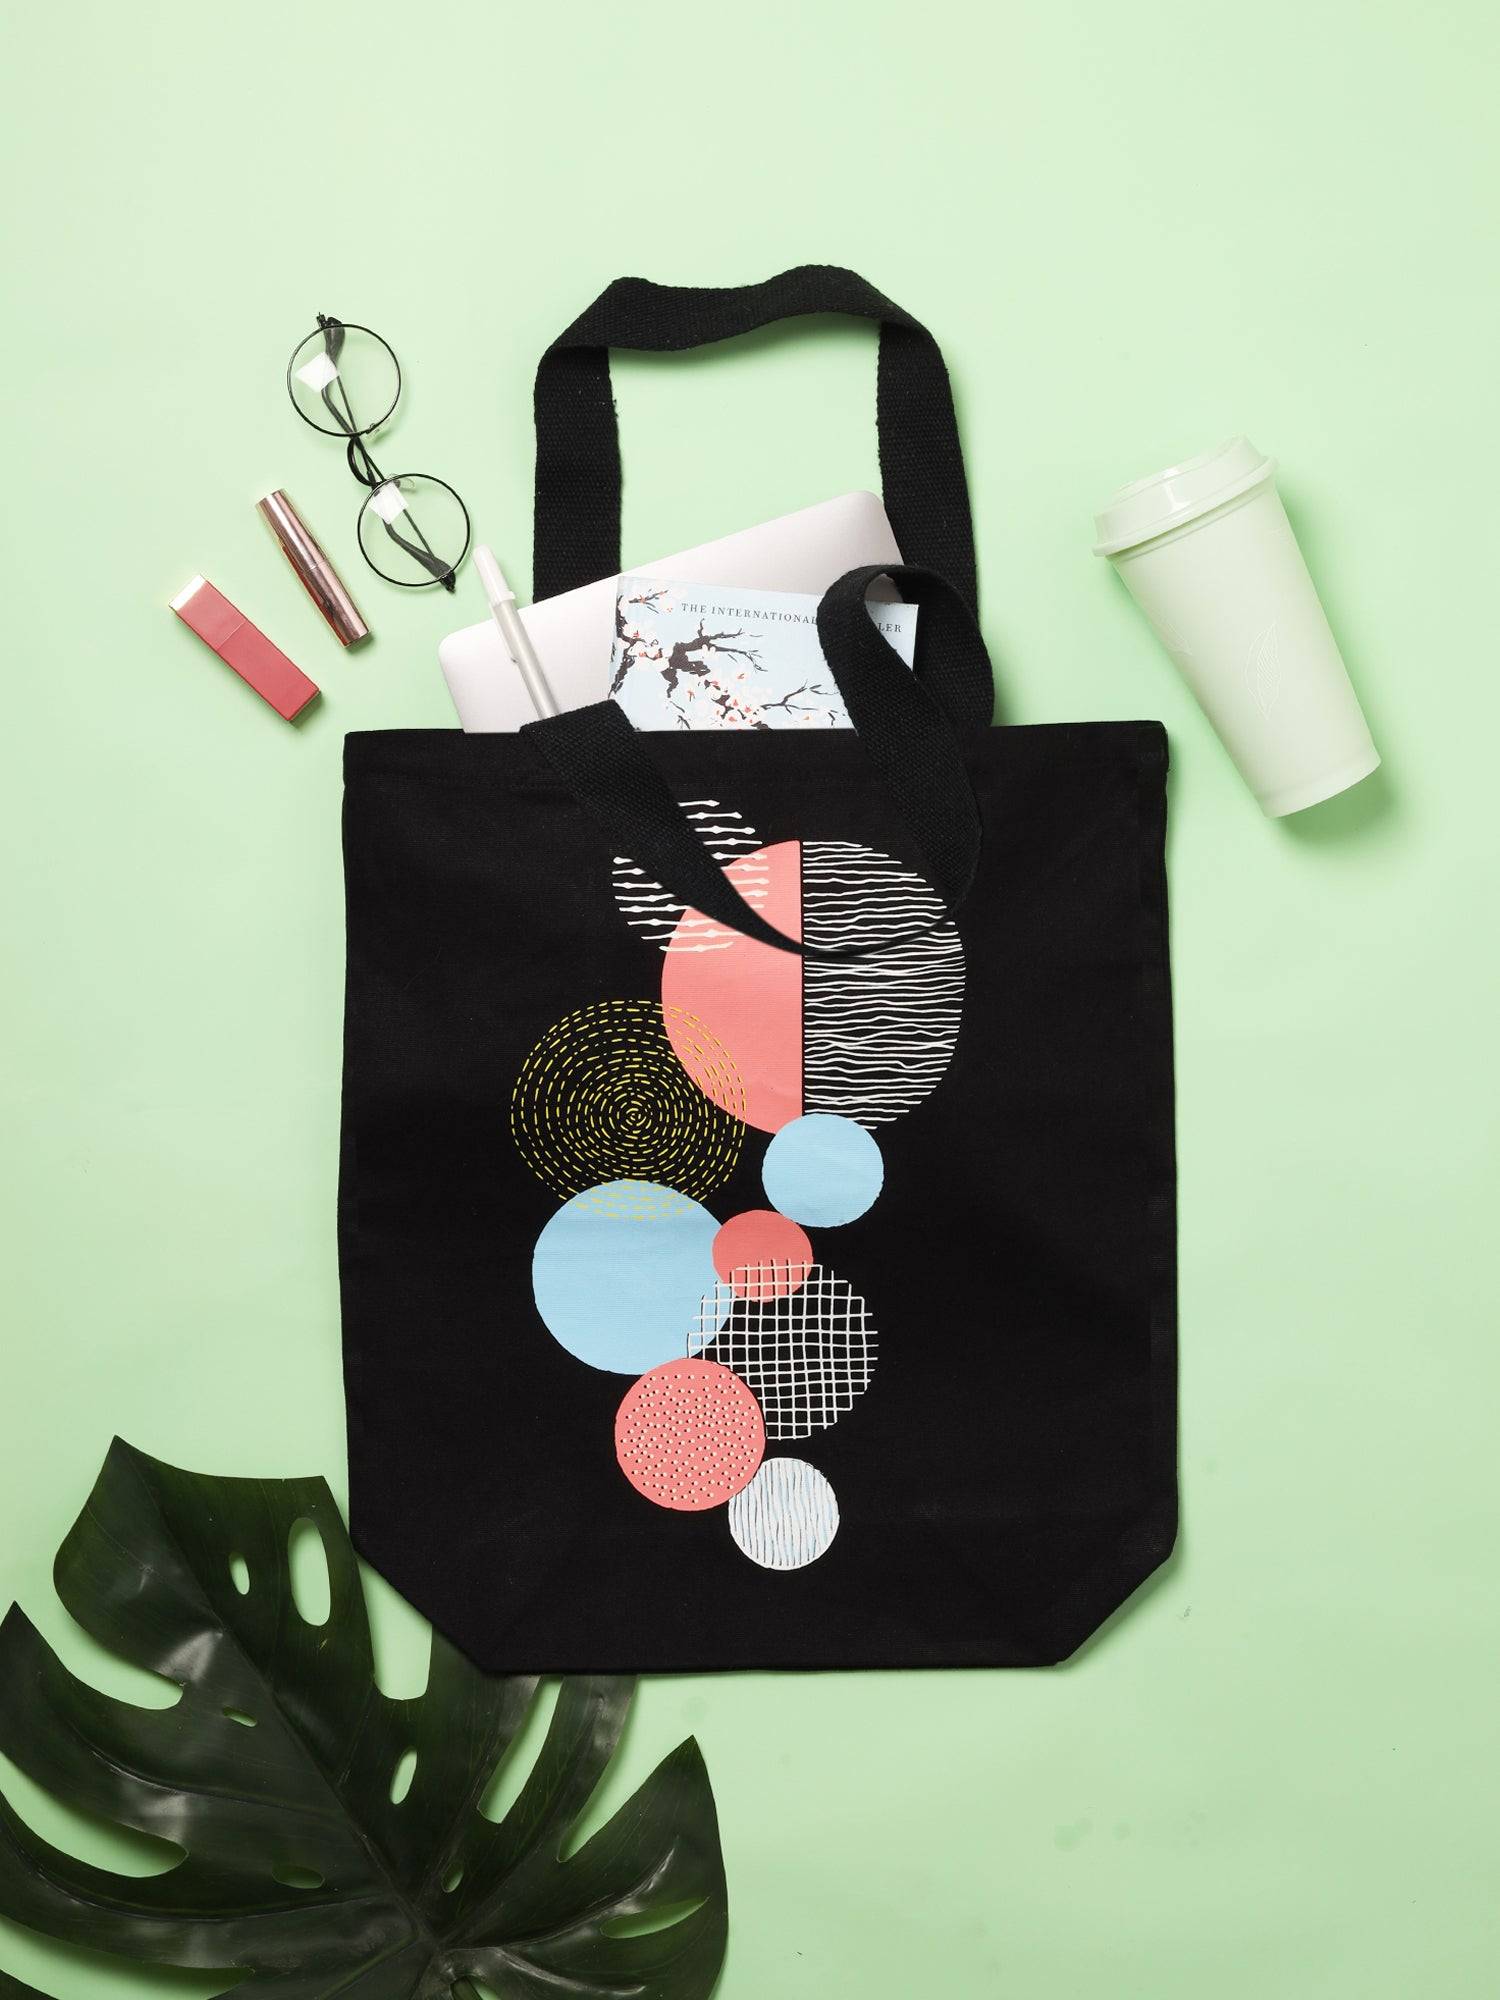 Doodle Abstract Sphere Tote Bag